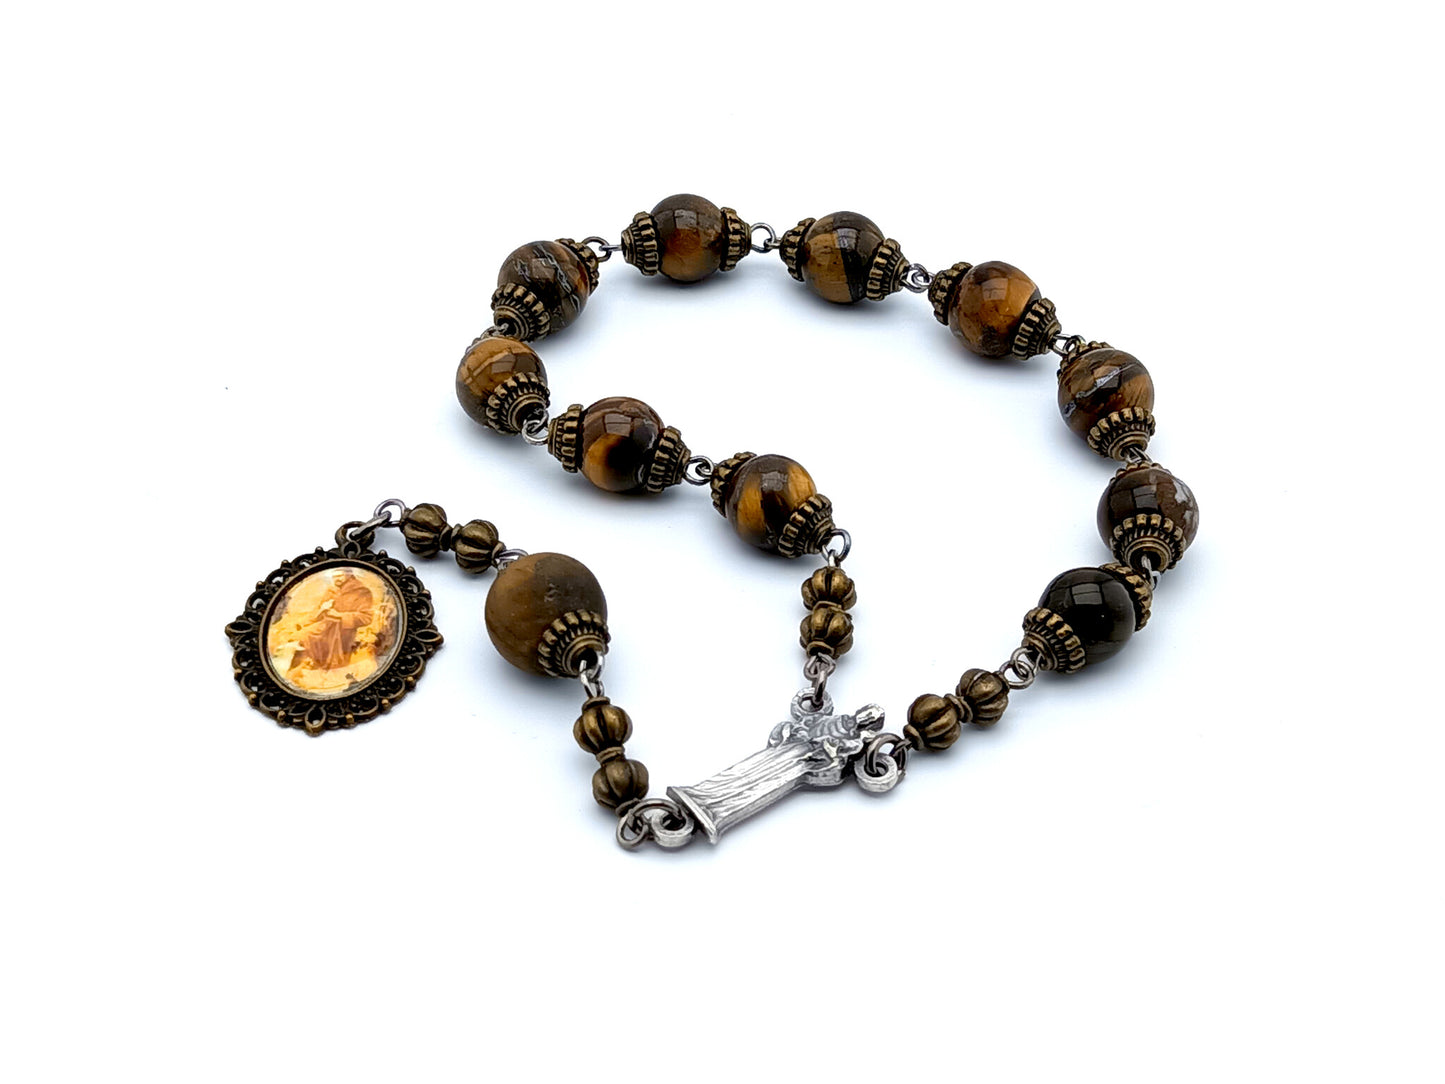 Saint Francis of Assisi unique rosary beads single decade rosary with tigers eye gemstone beads, silver statue centre medal and picture end medal.